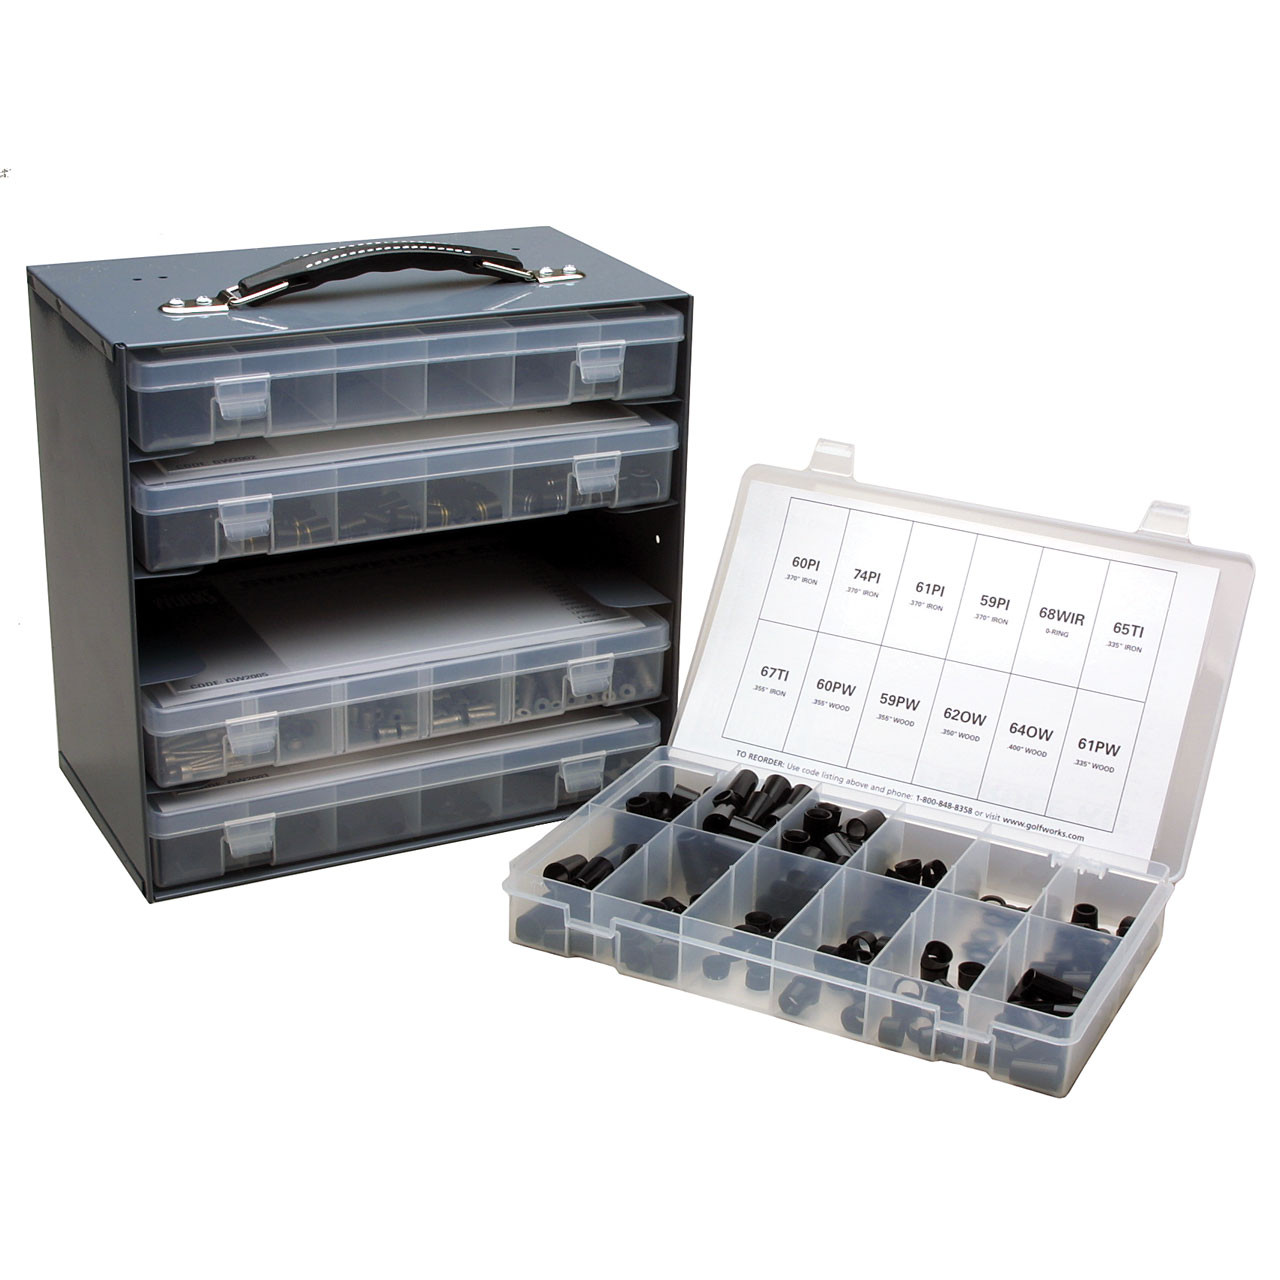 Small Parts Rack & Adjustable Storage Box-DC0001 - The GolfWorks